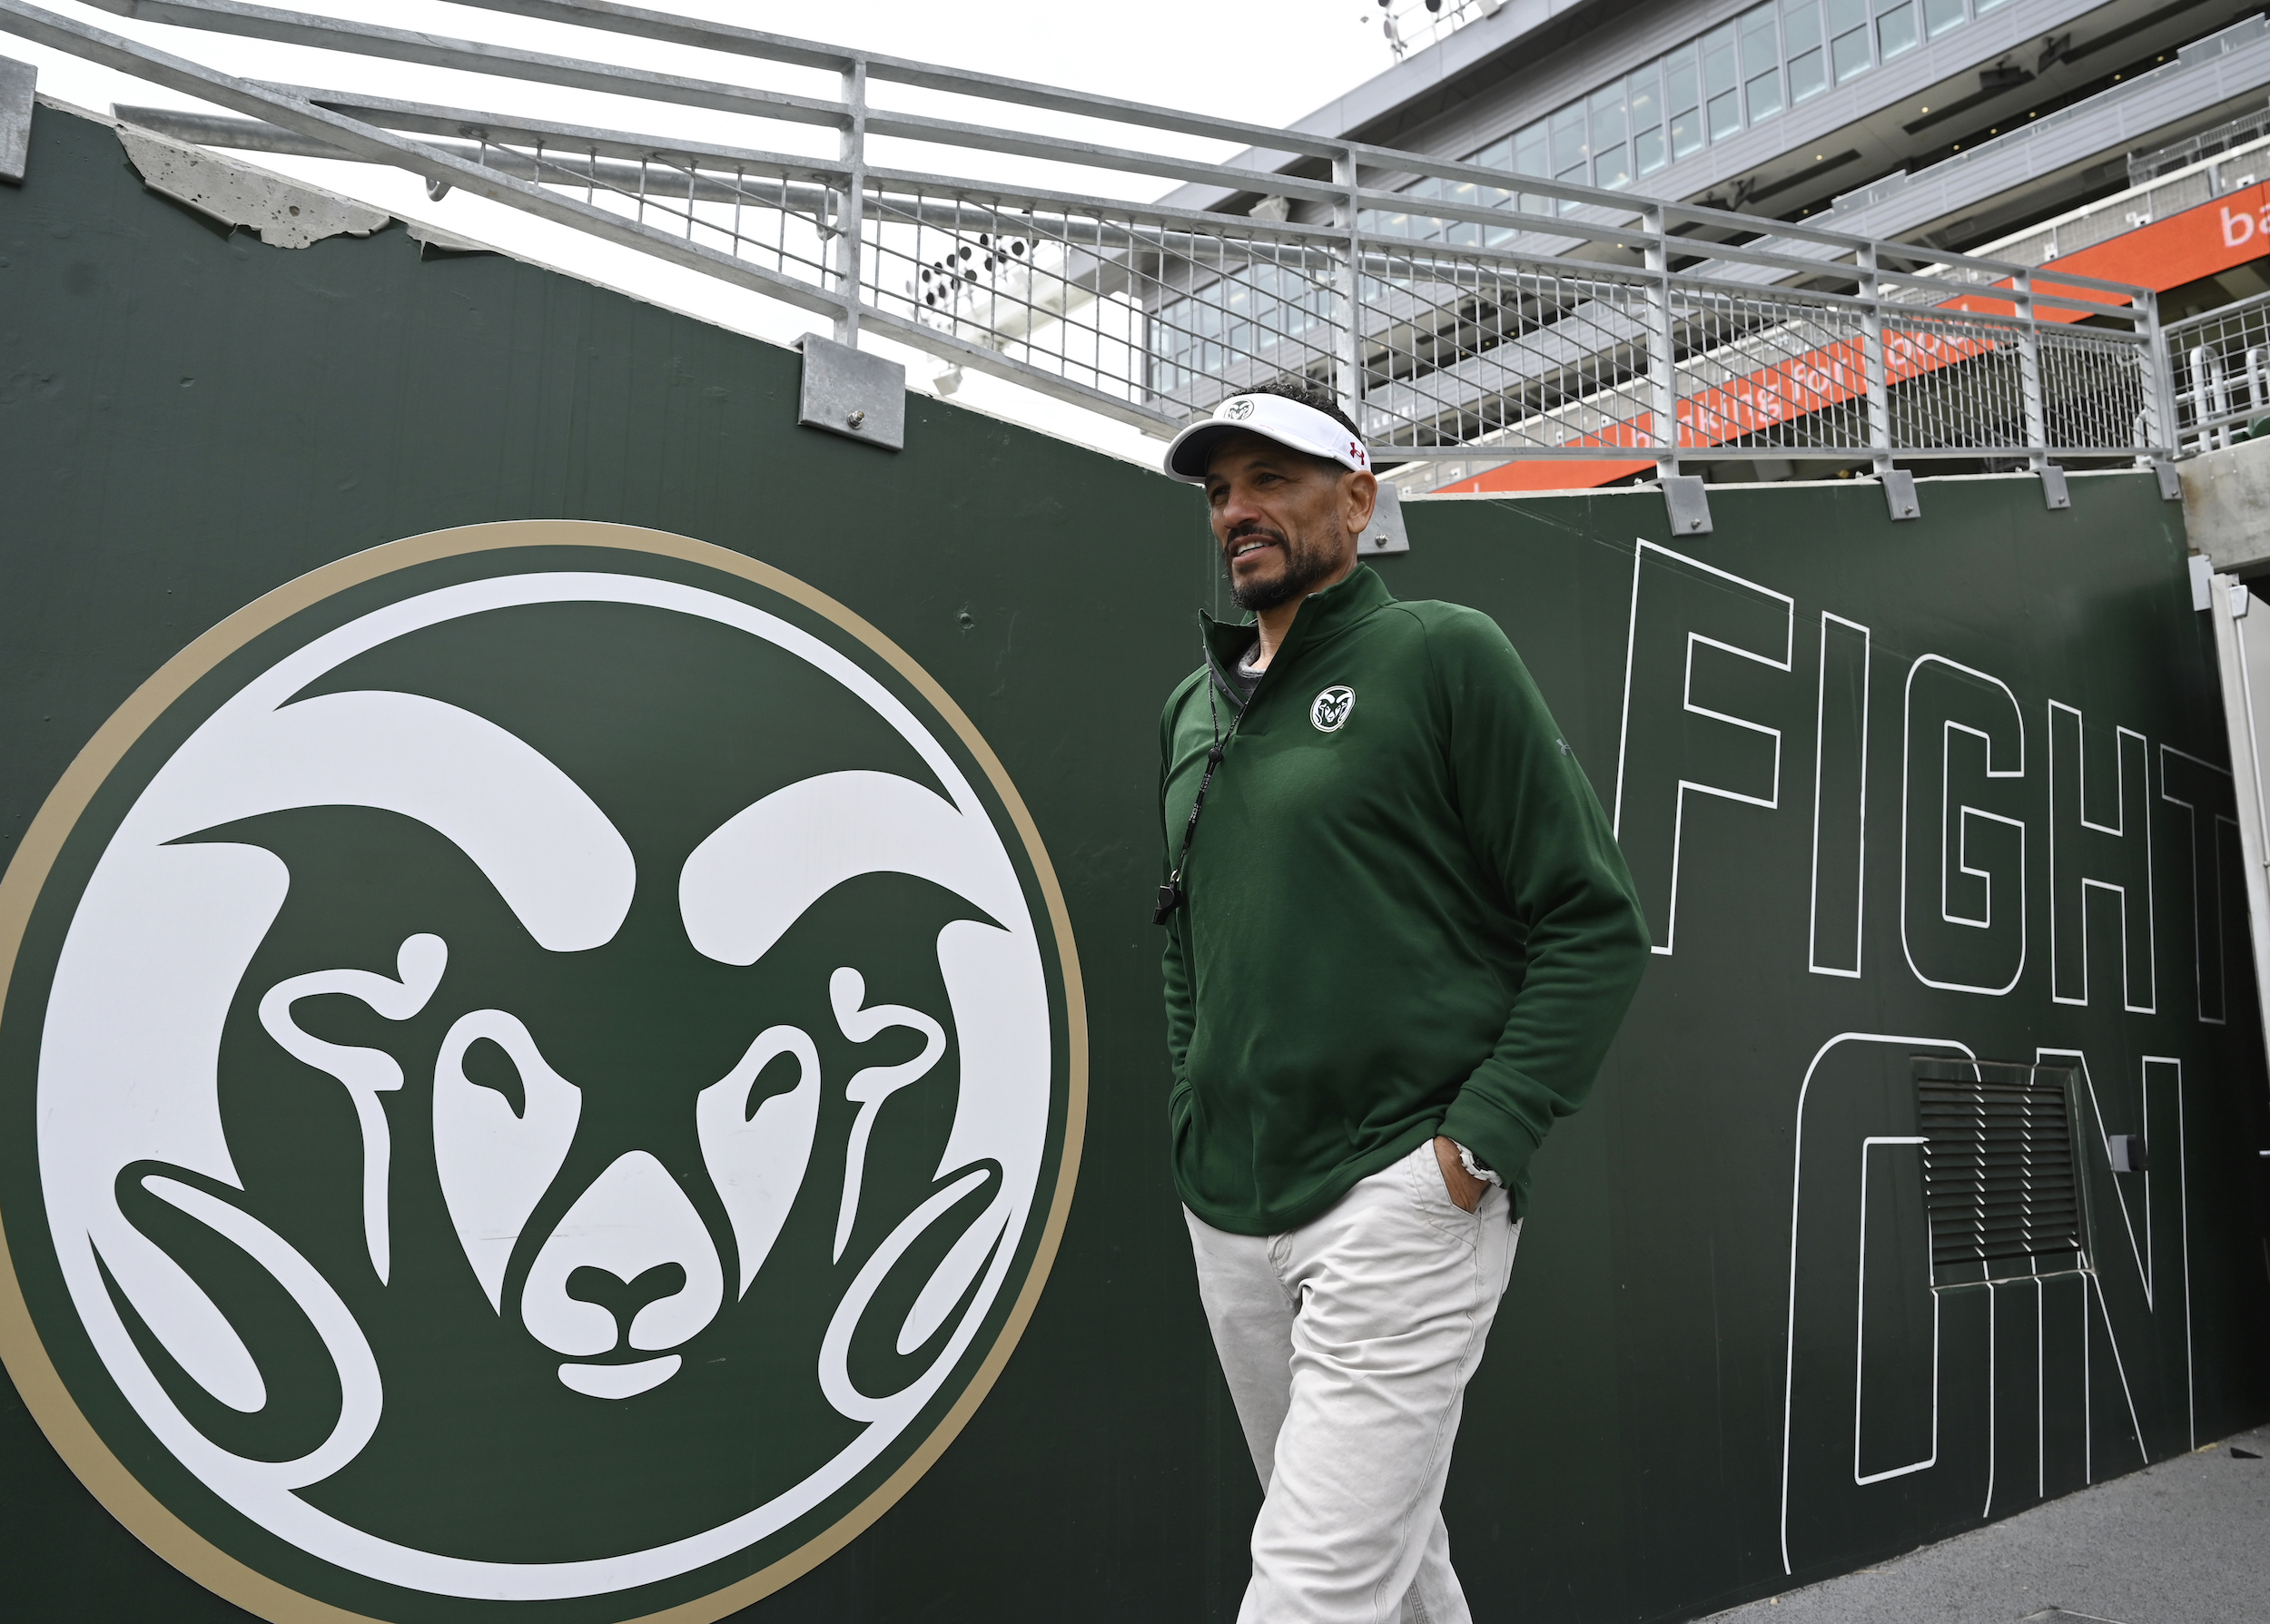 Colorado State Rams head football coach Jay Norvell enter the field for pregame warmups.